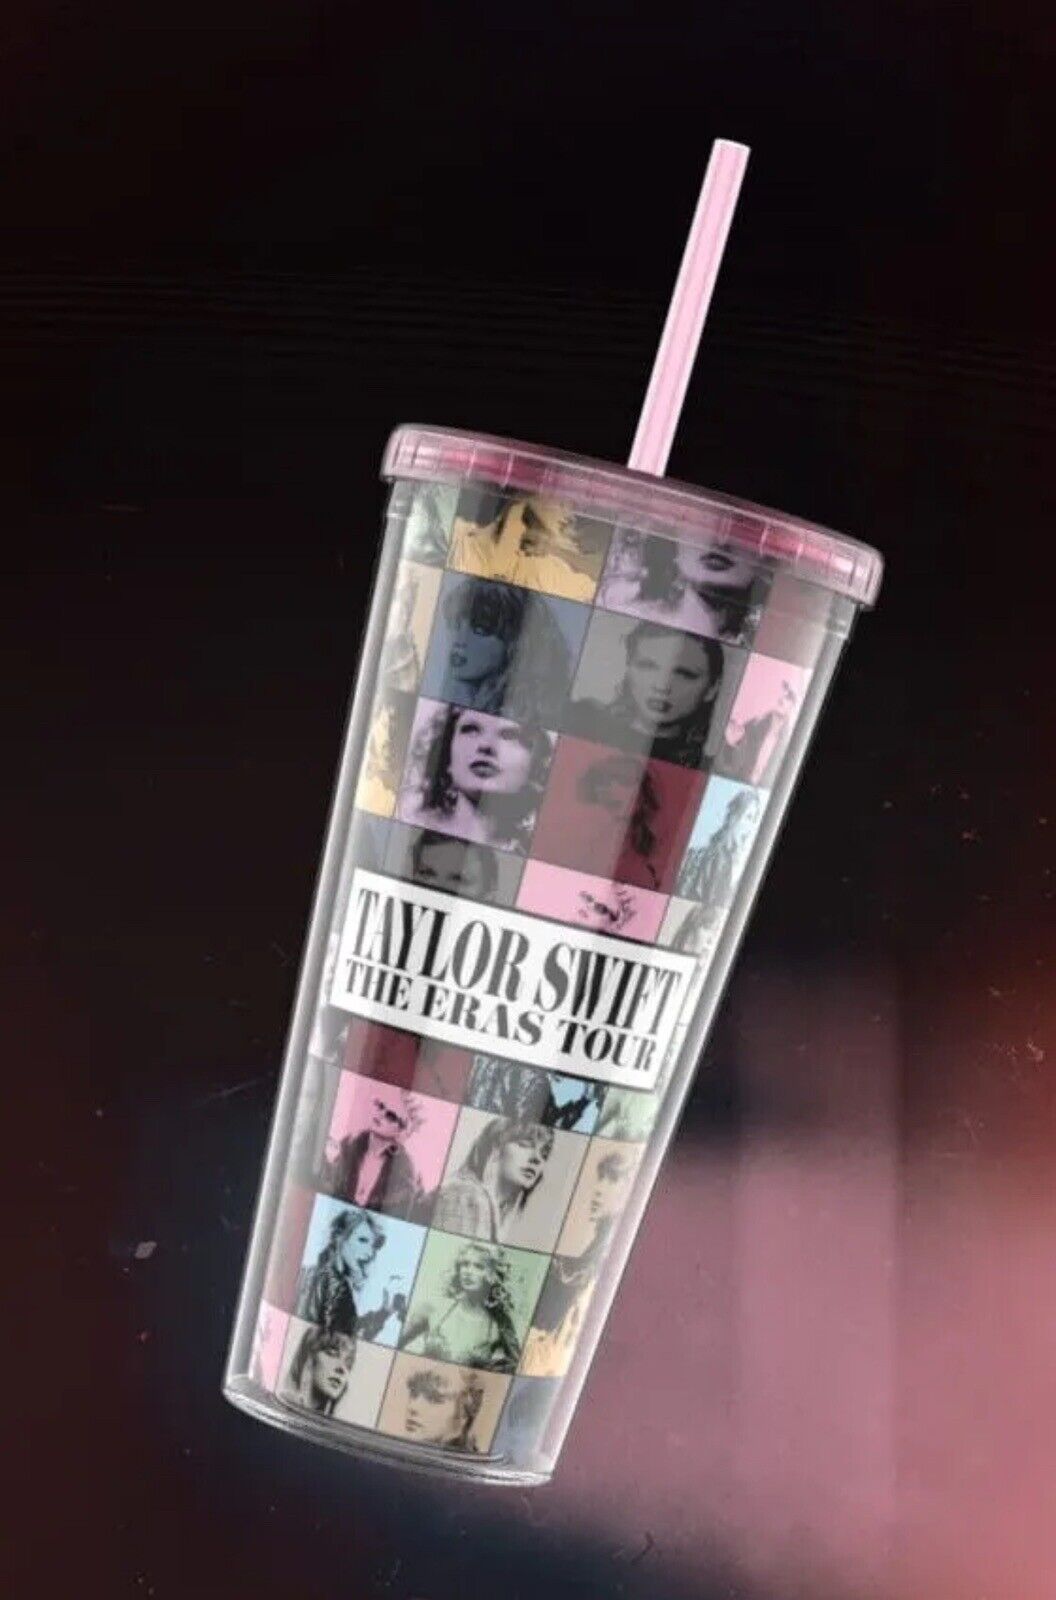 LIMITED-EDITION TAYLOR SWIFT: THE ERAS TOUR TUMBLER AVAILABLE FOR PRE-ORDER  AT GOLDEN VILLAGE SINGAPORE! - Shout